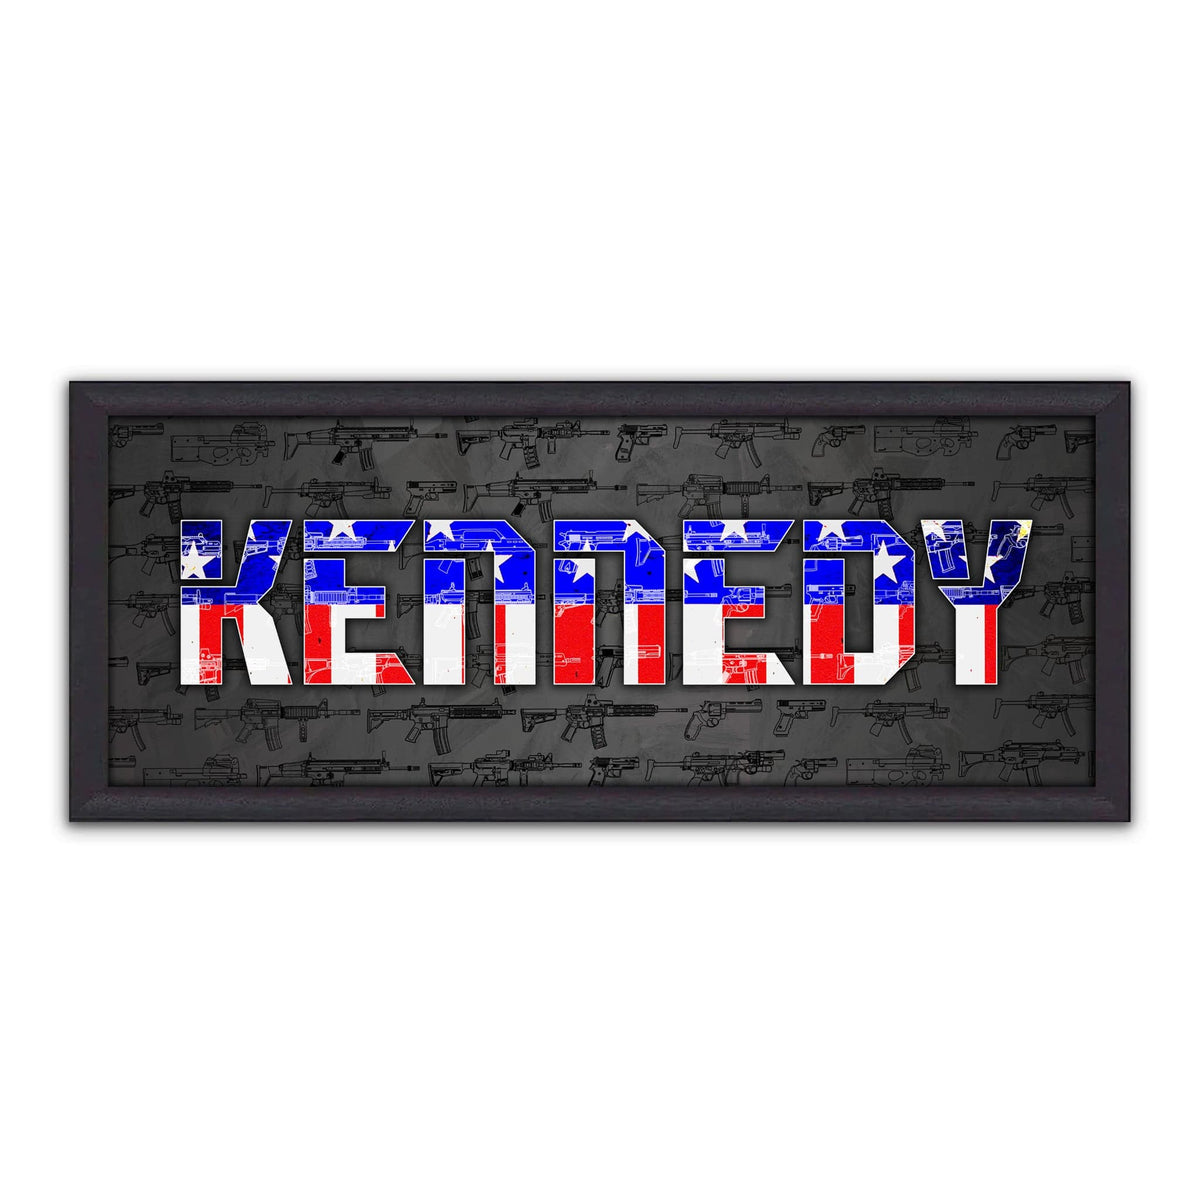 US Flag canvas art - Personalized art from Personal Prints